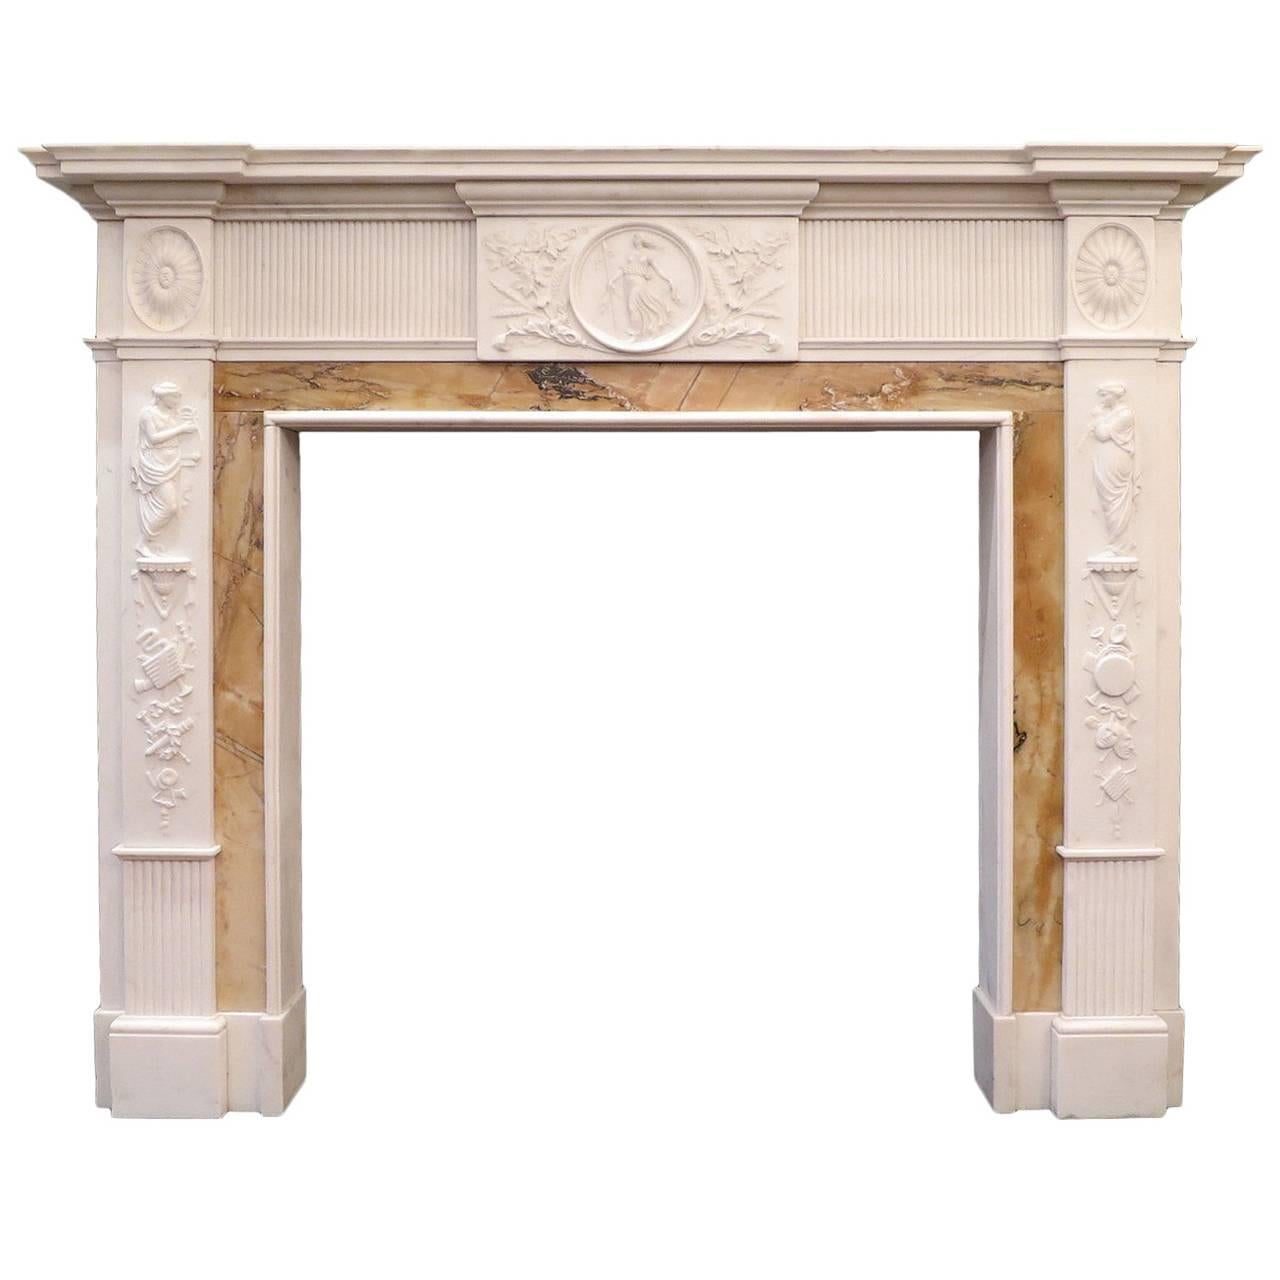 Antique 19th Century Neoclassical Marble Fireplace Mantel